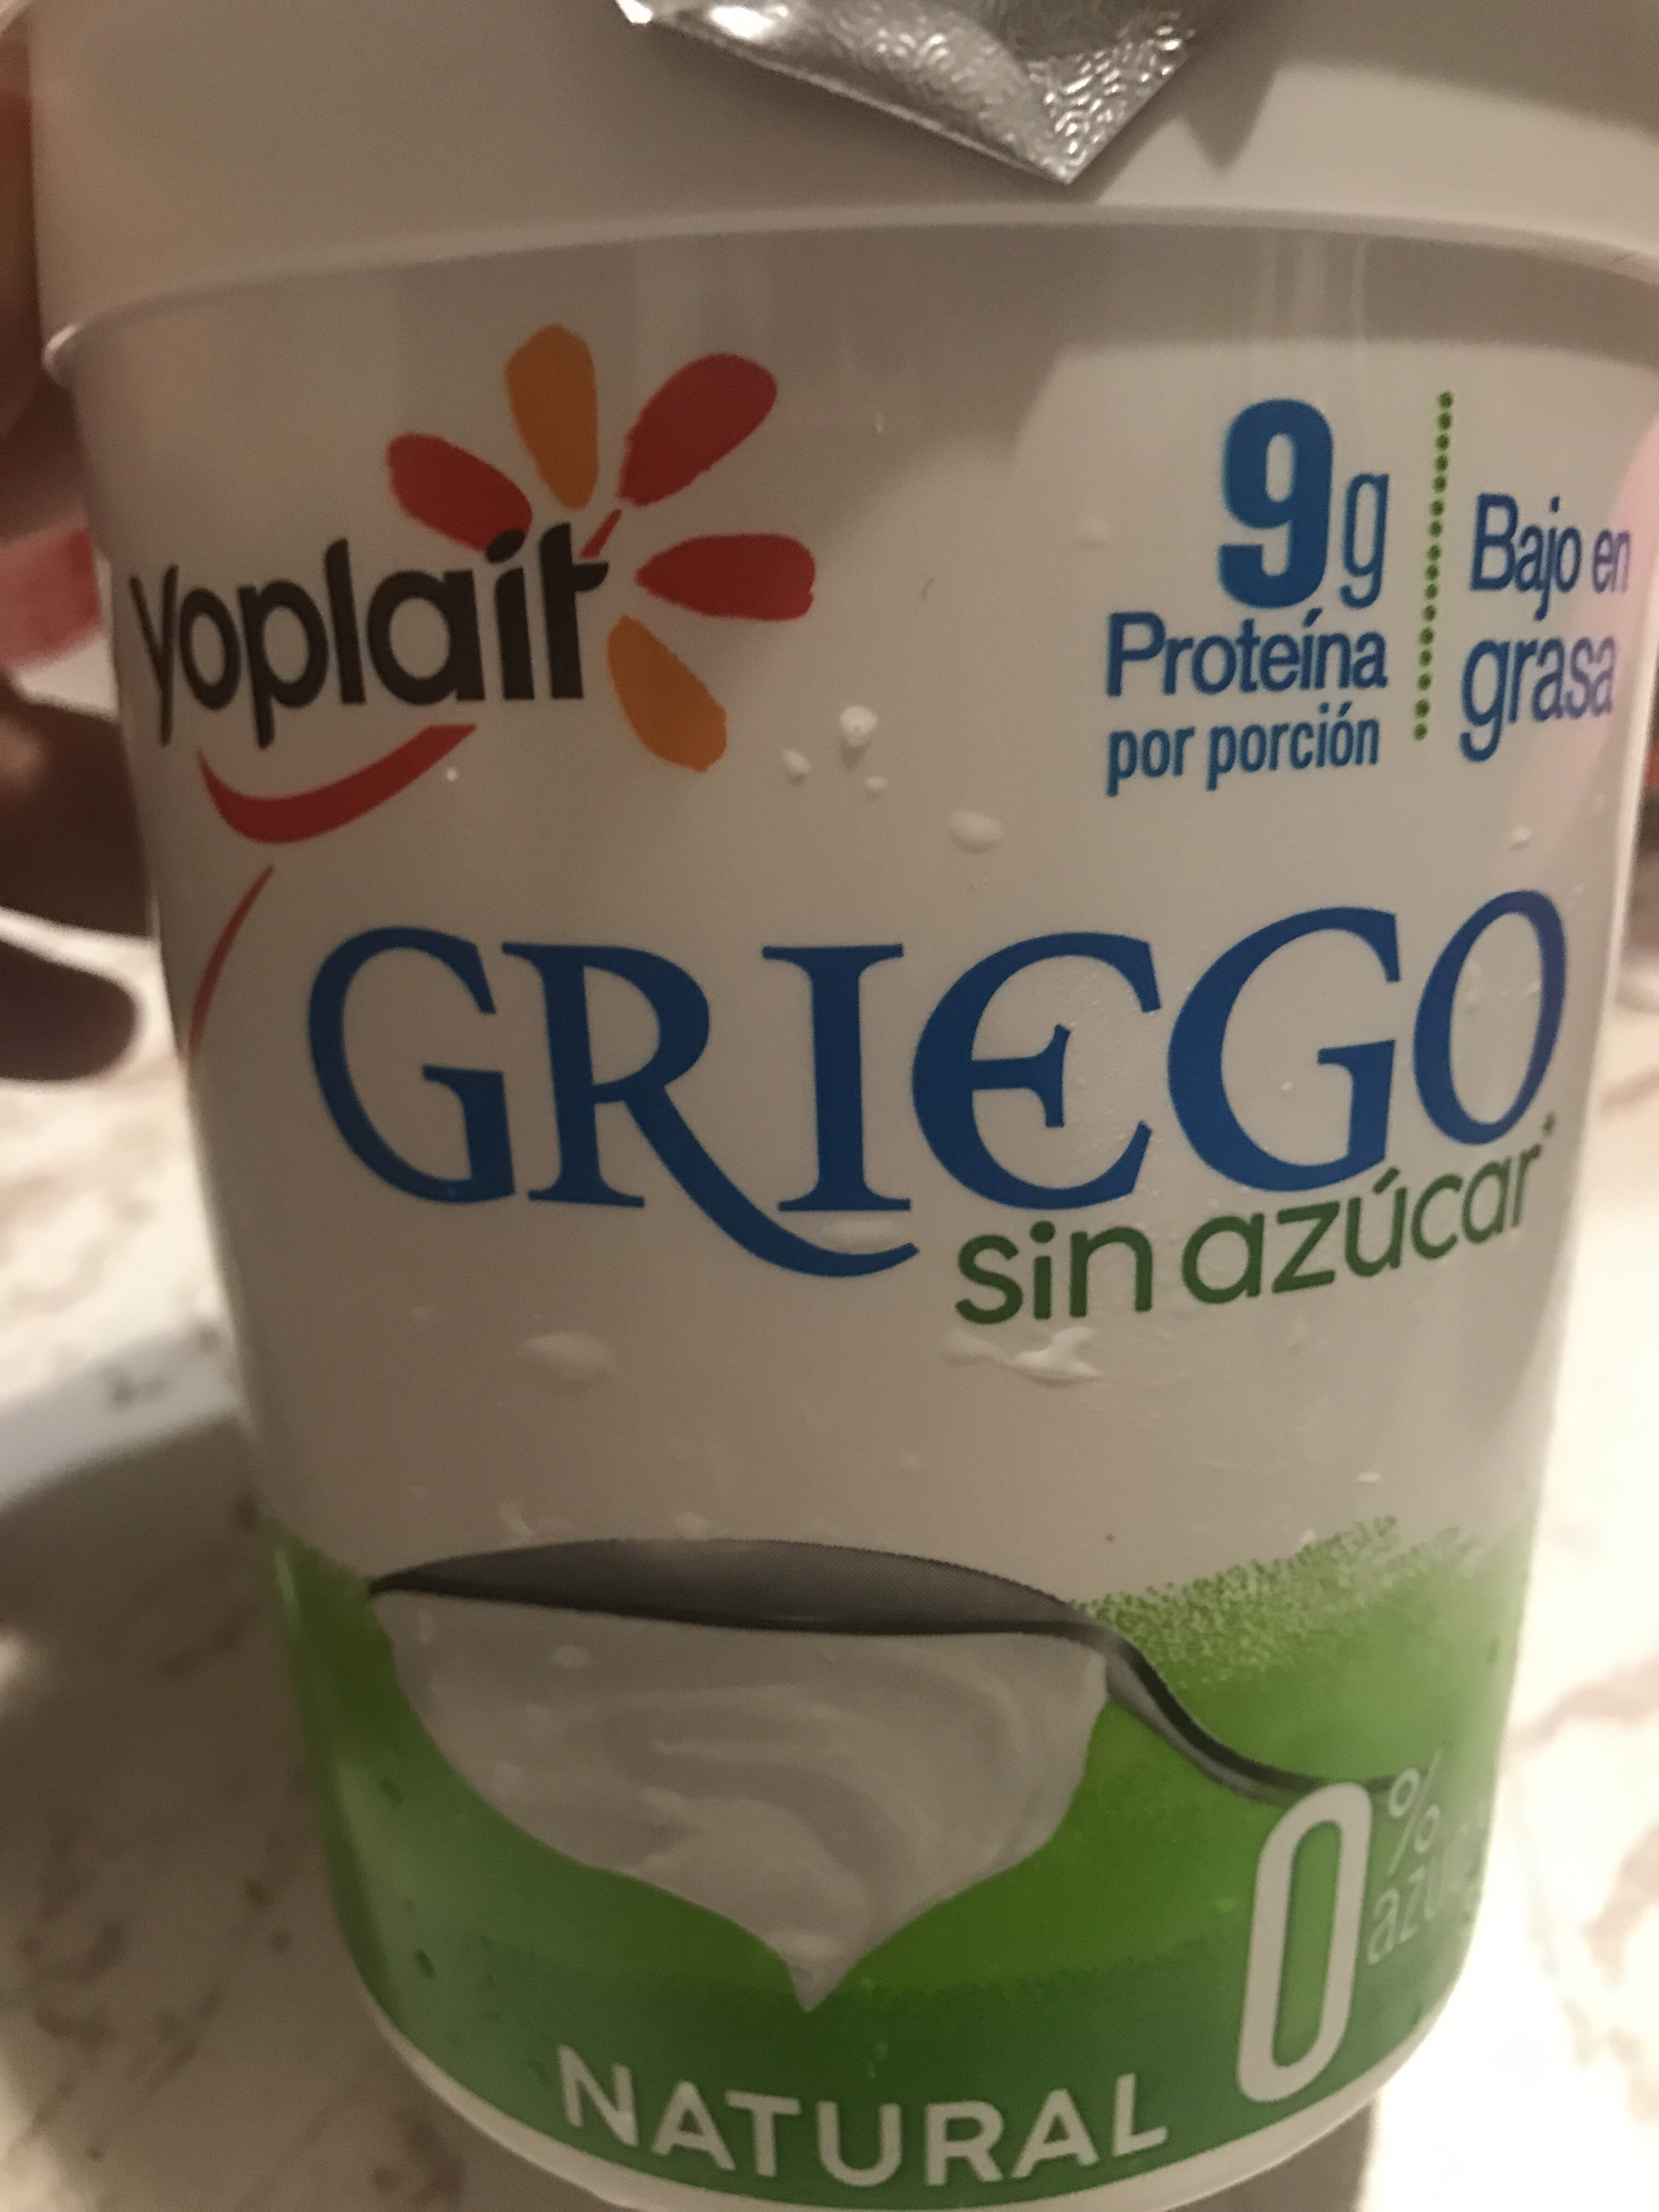 Griego - Producto